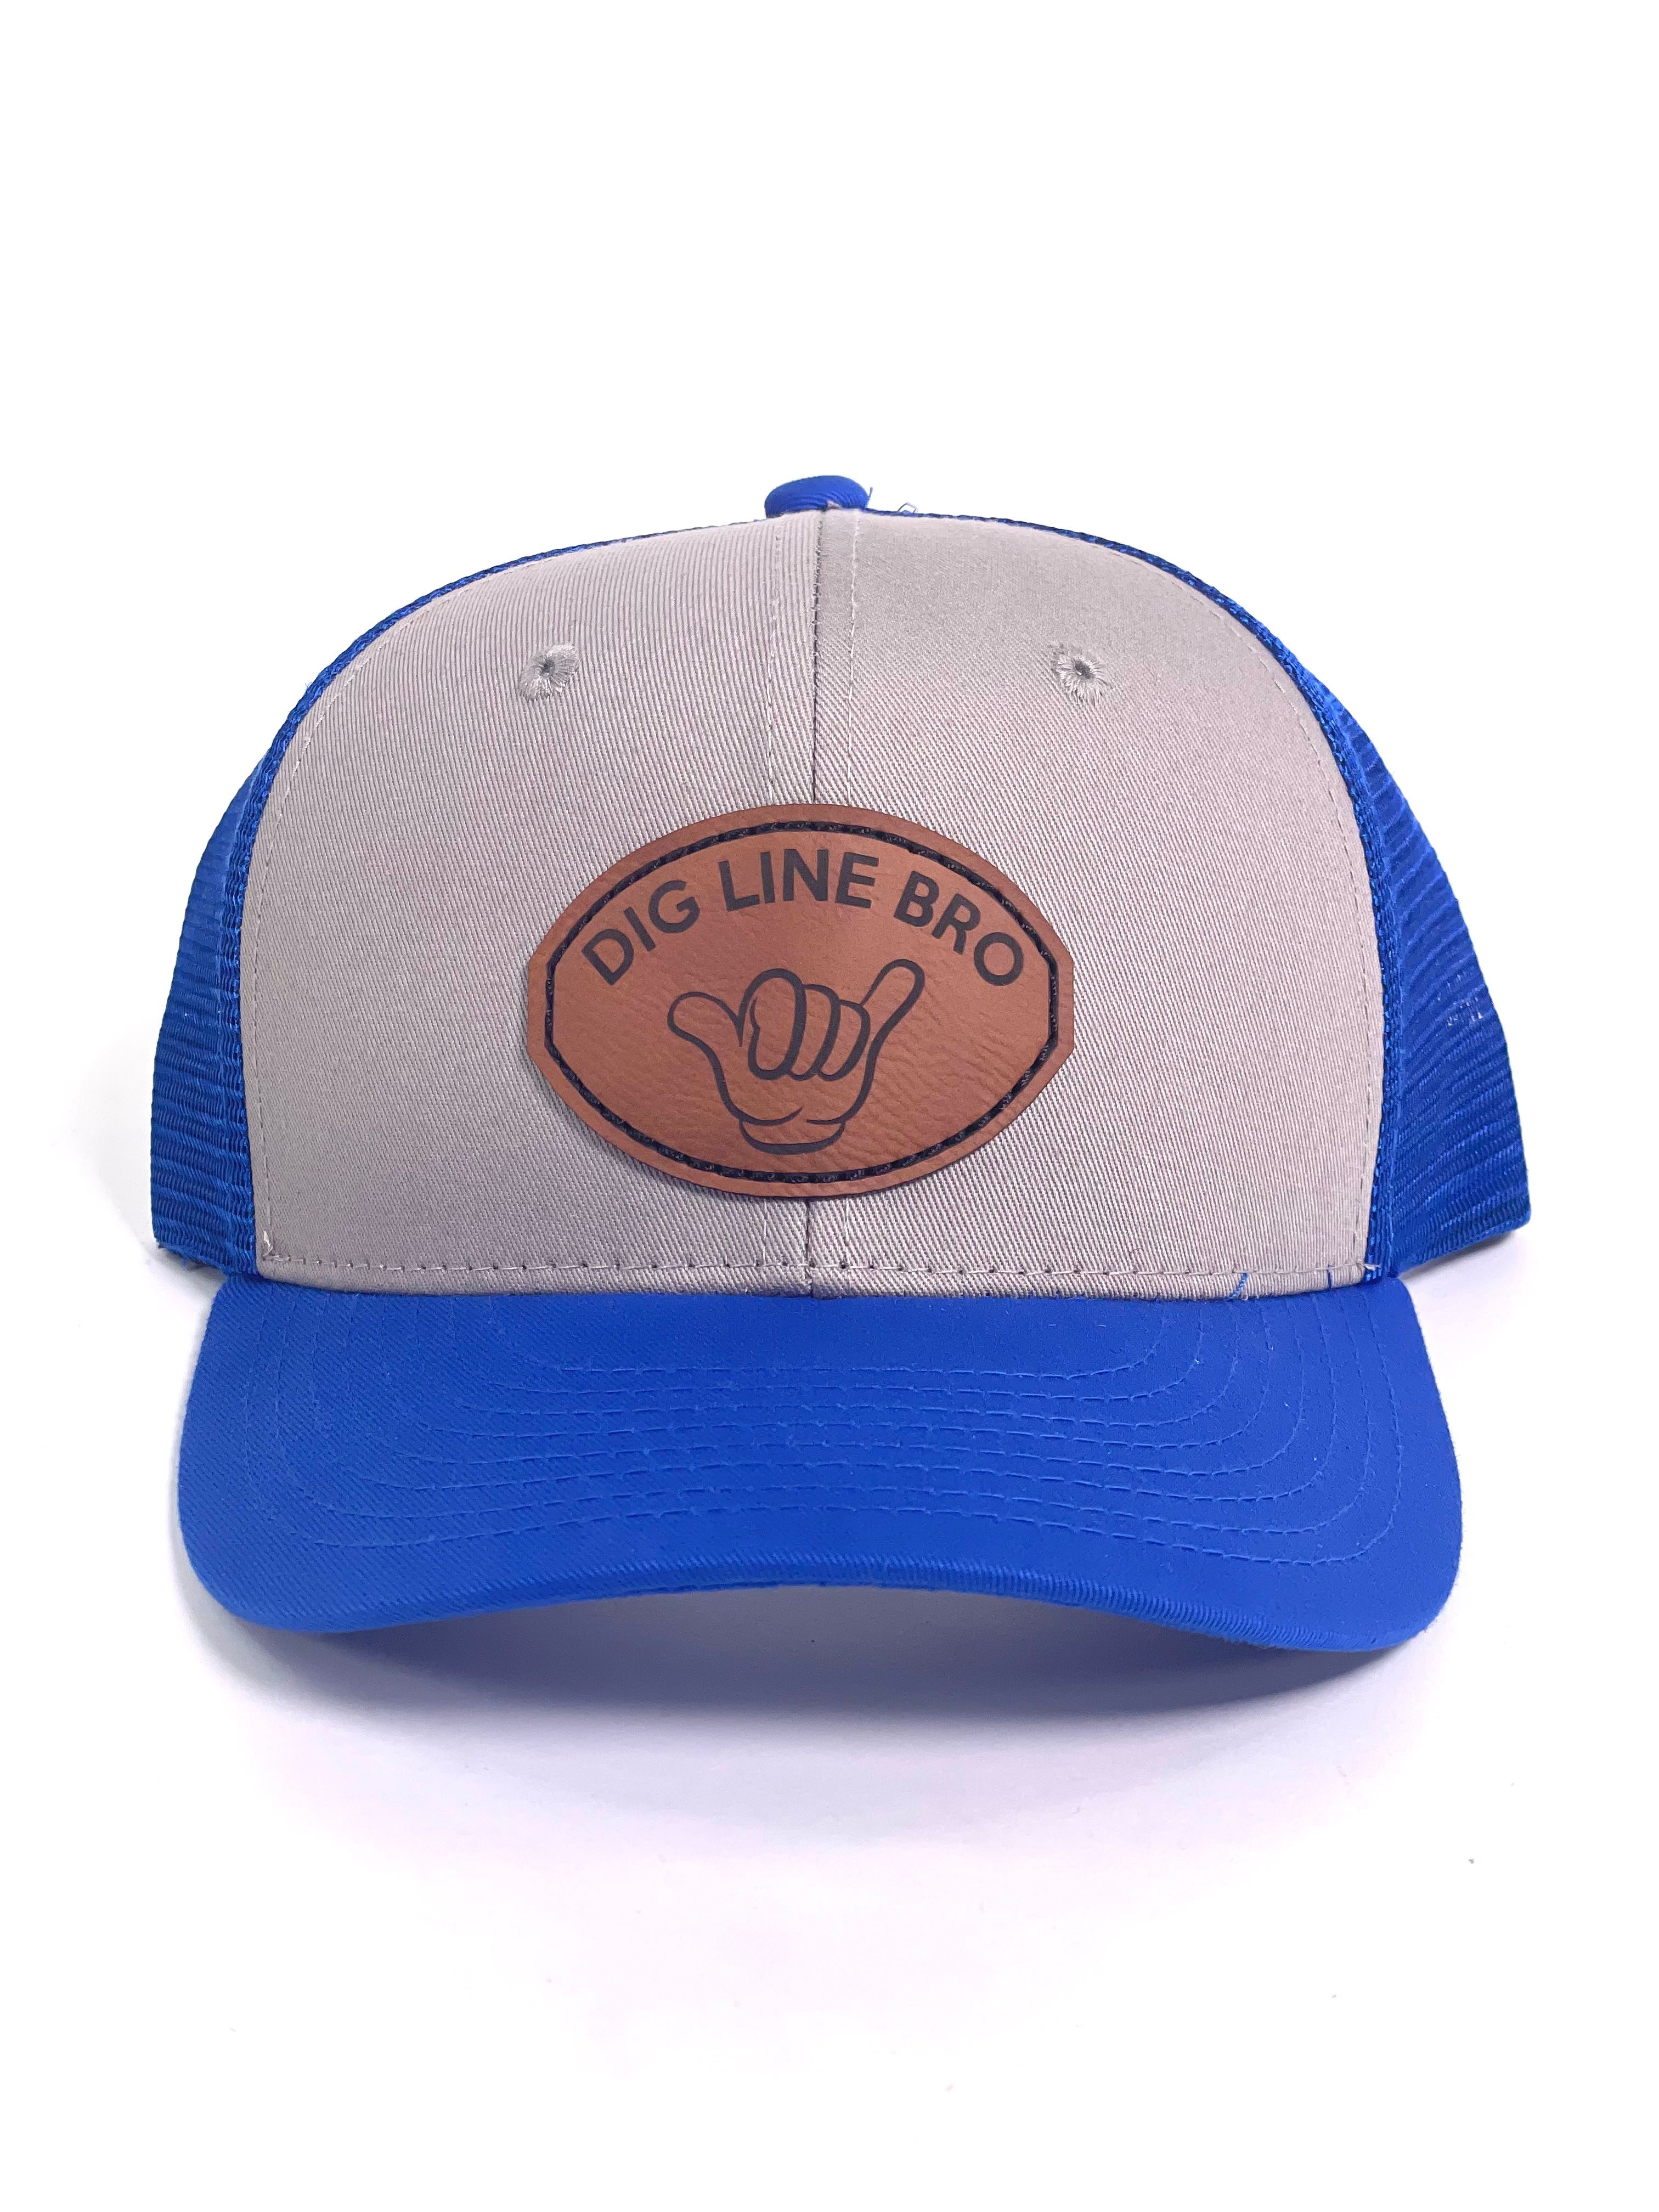 DIG LINE BRO LEATHER PATCH HAT